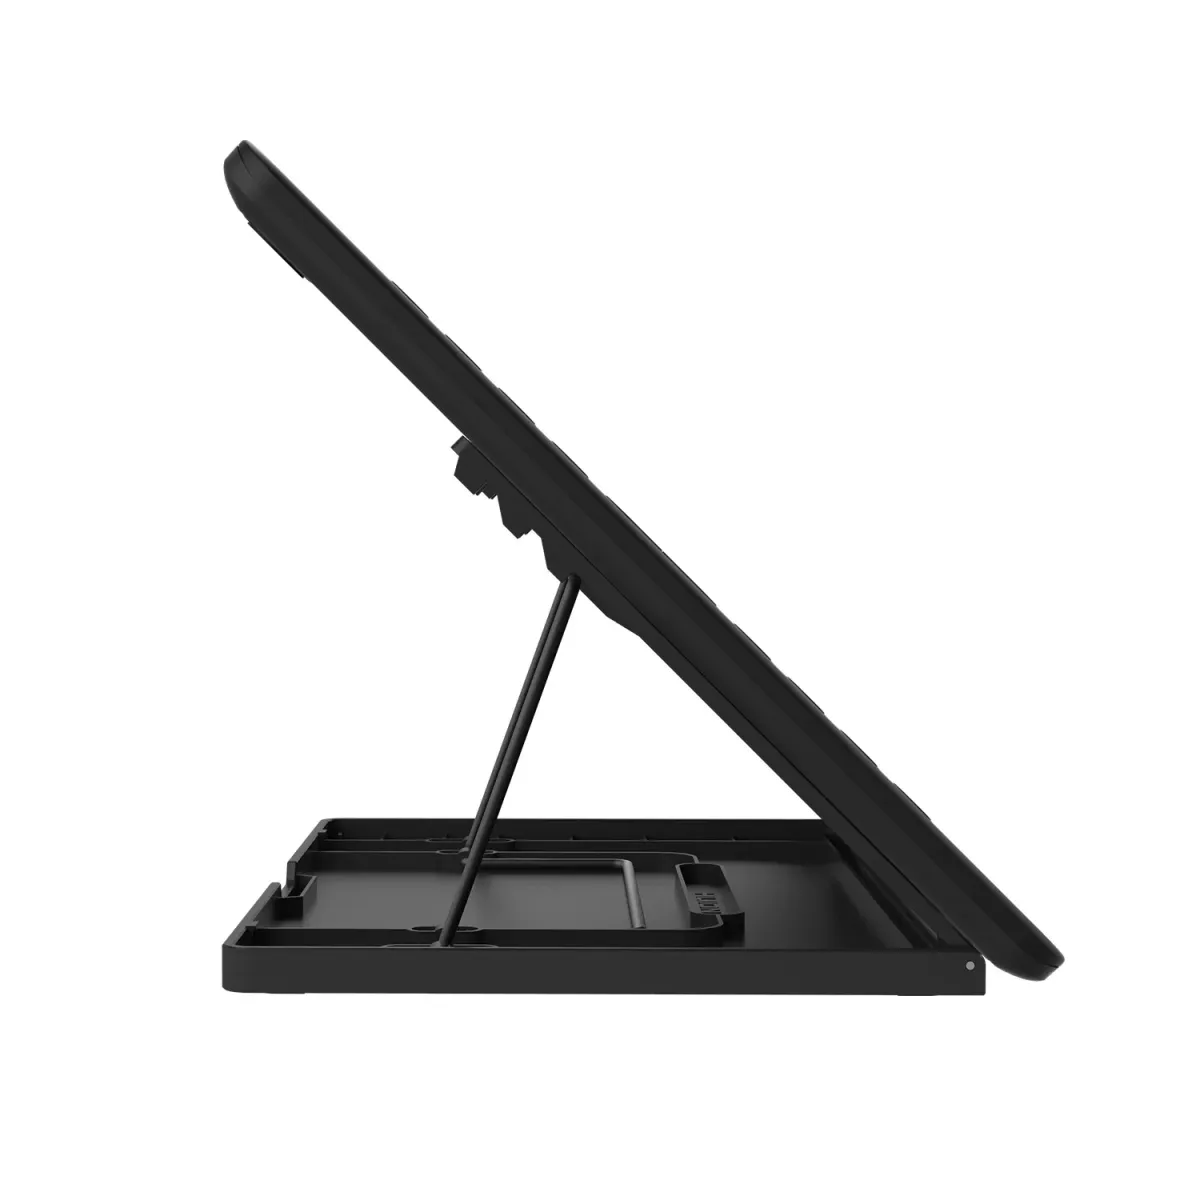 Huion LA3 LED Light A3 size Drawing Pad  Huion Official Store: Drawing  Tablets, Pen Tablets, Pen Display, Led Light Pad